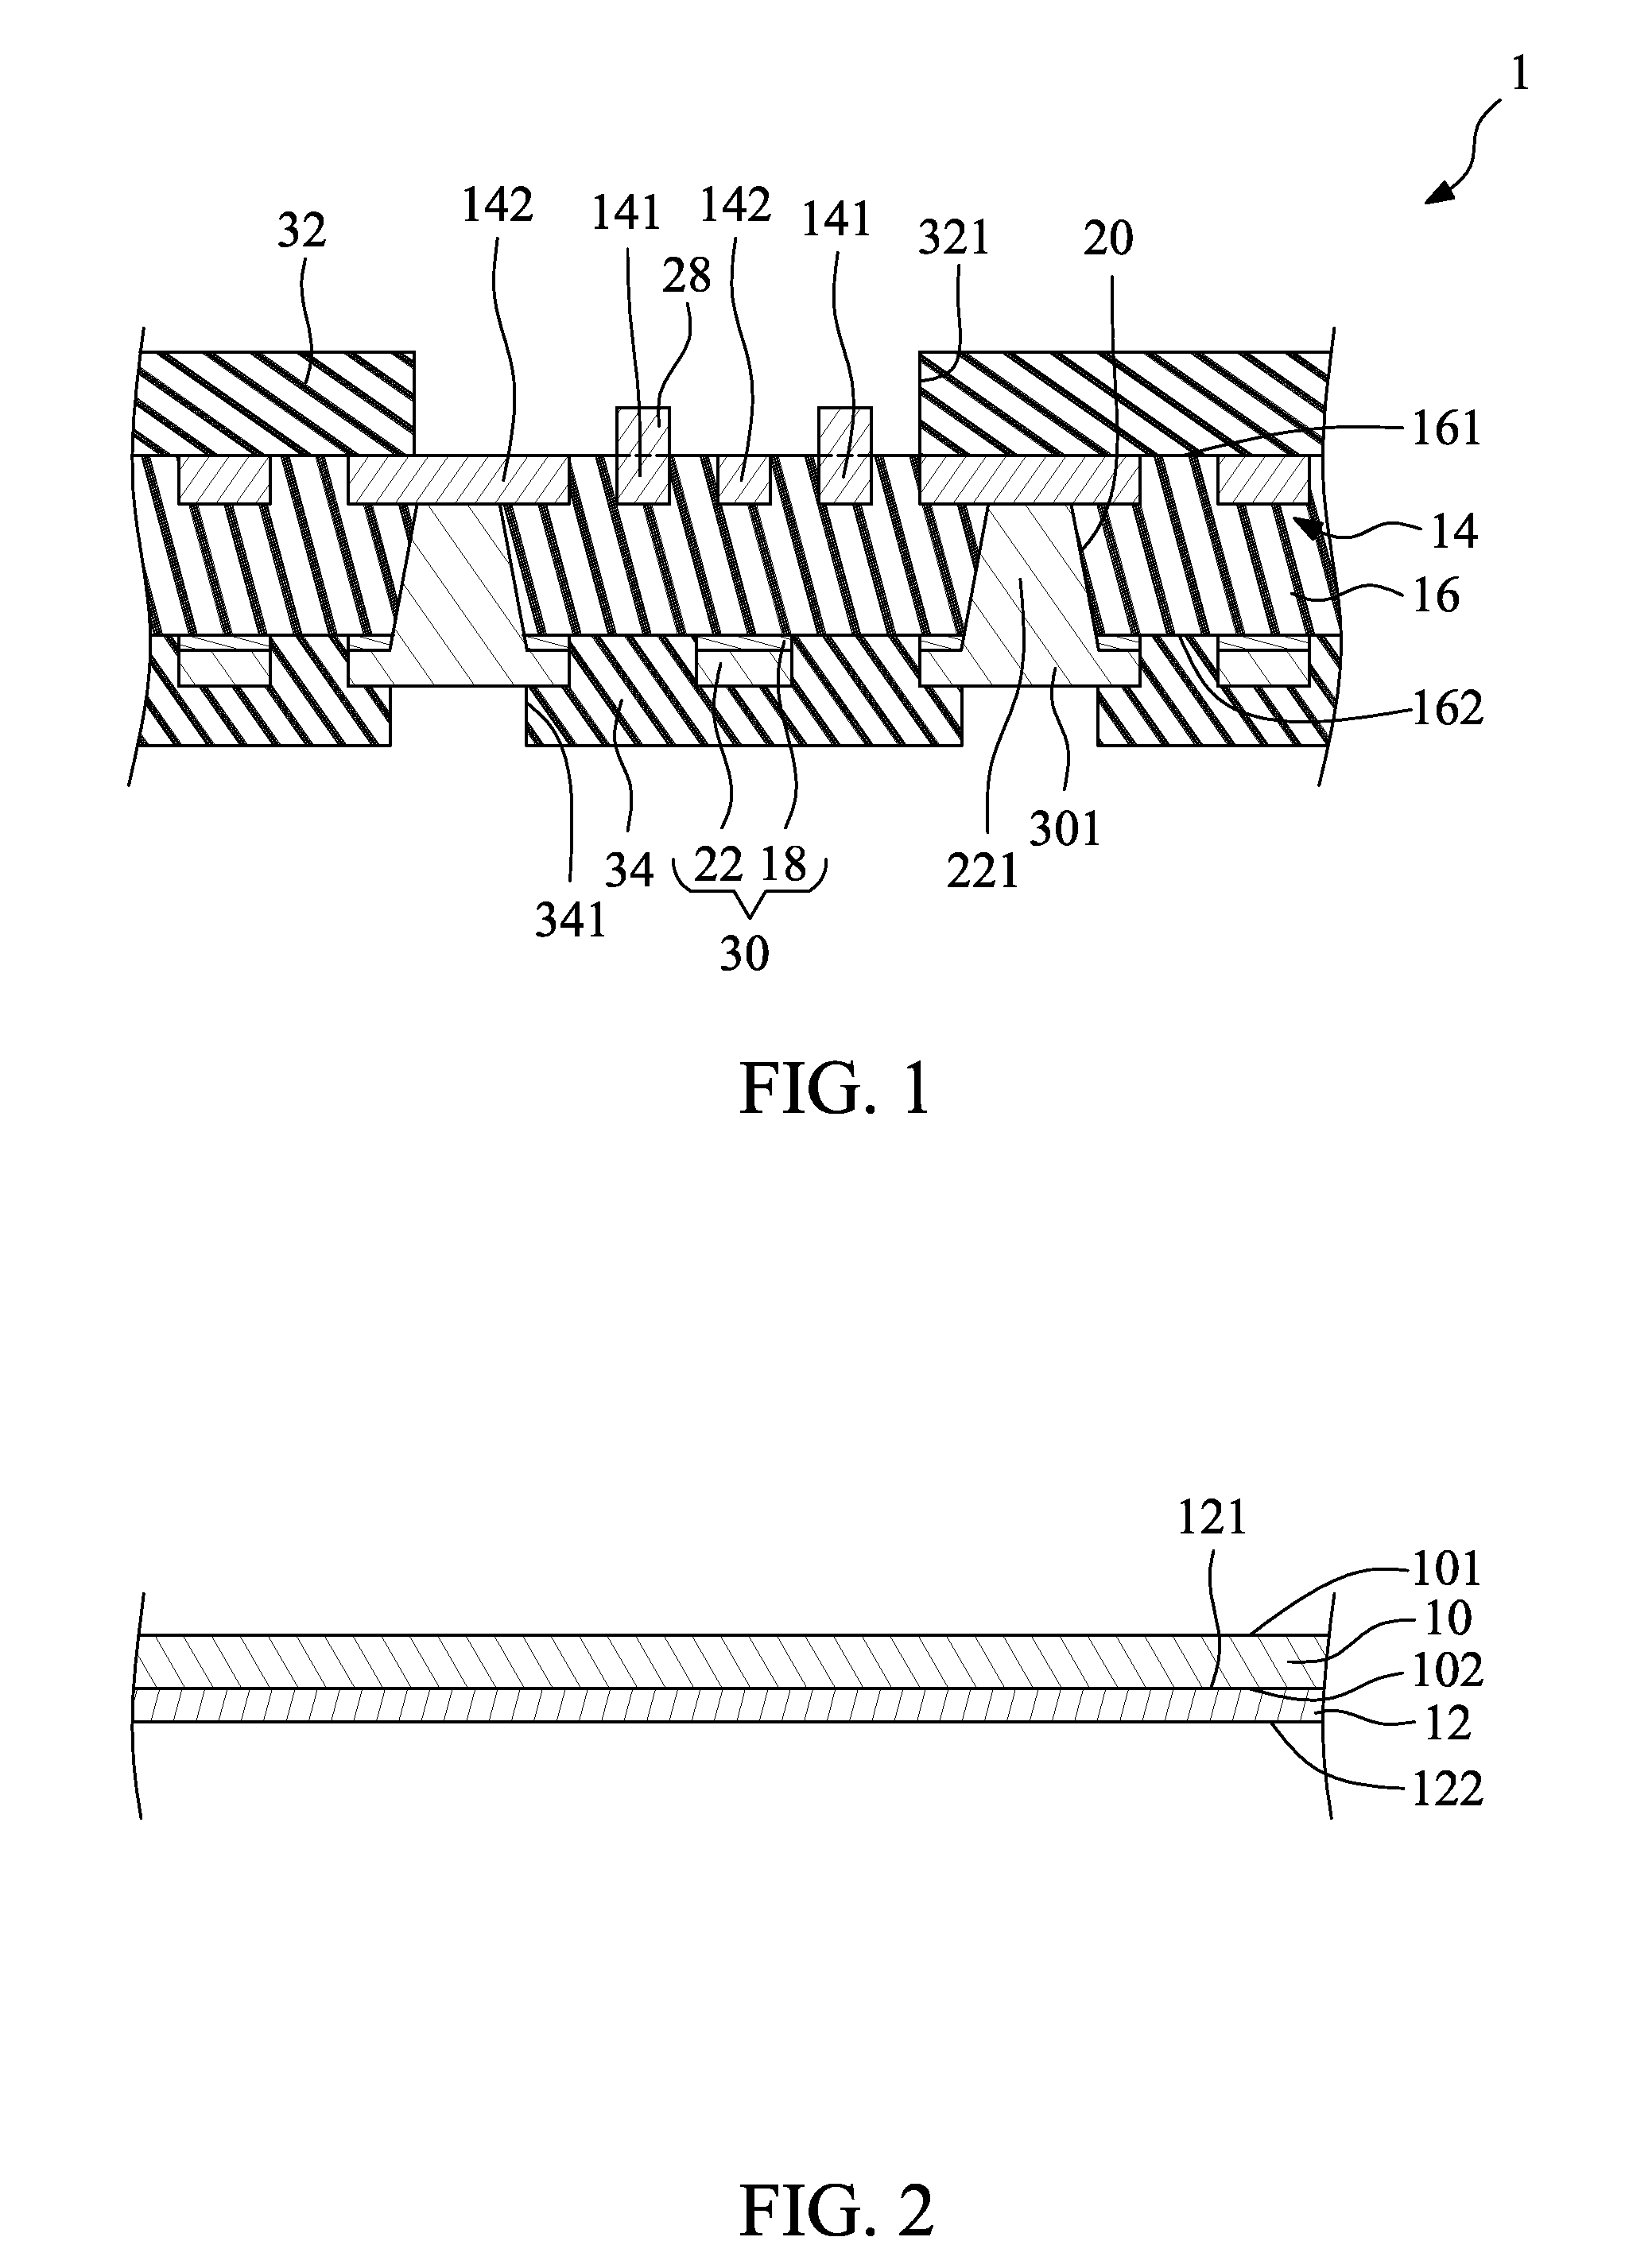 Semiconductor substrate and method for making the same